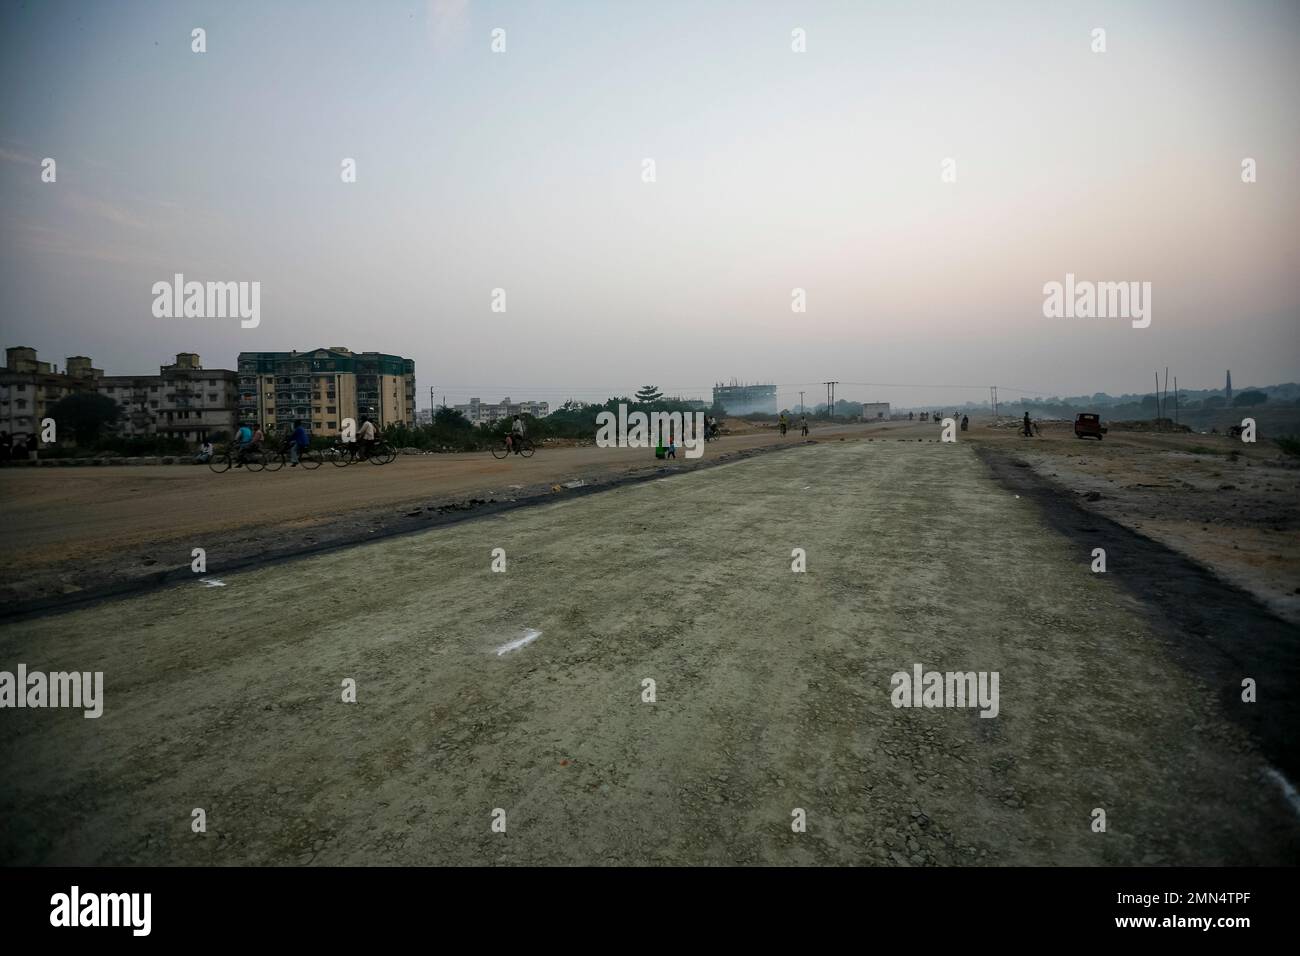 A Road constructed in Jamshedpur, Jharkhand Stock Photo